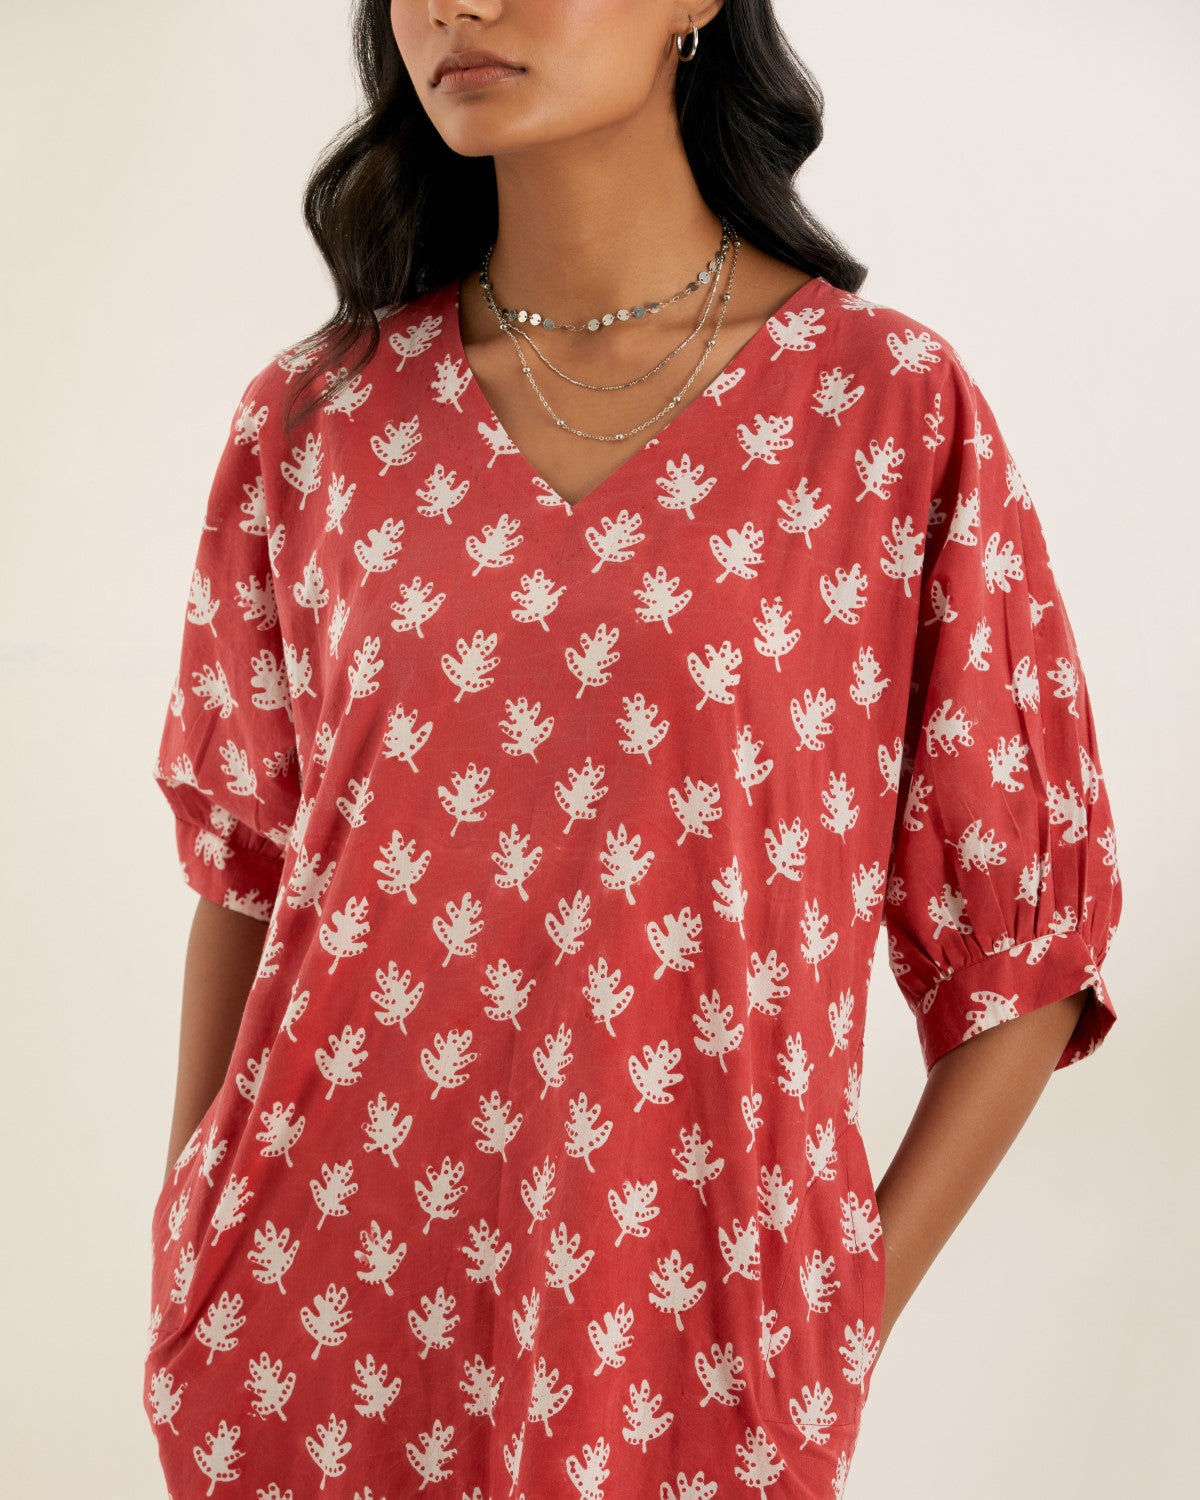 BERRY- Relaxed tunic with side slits